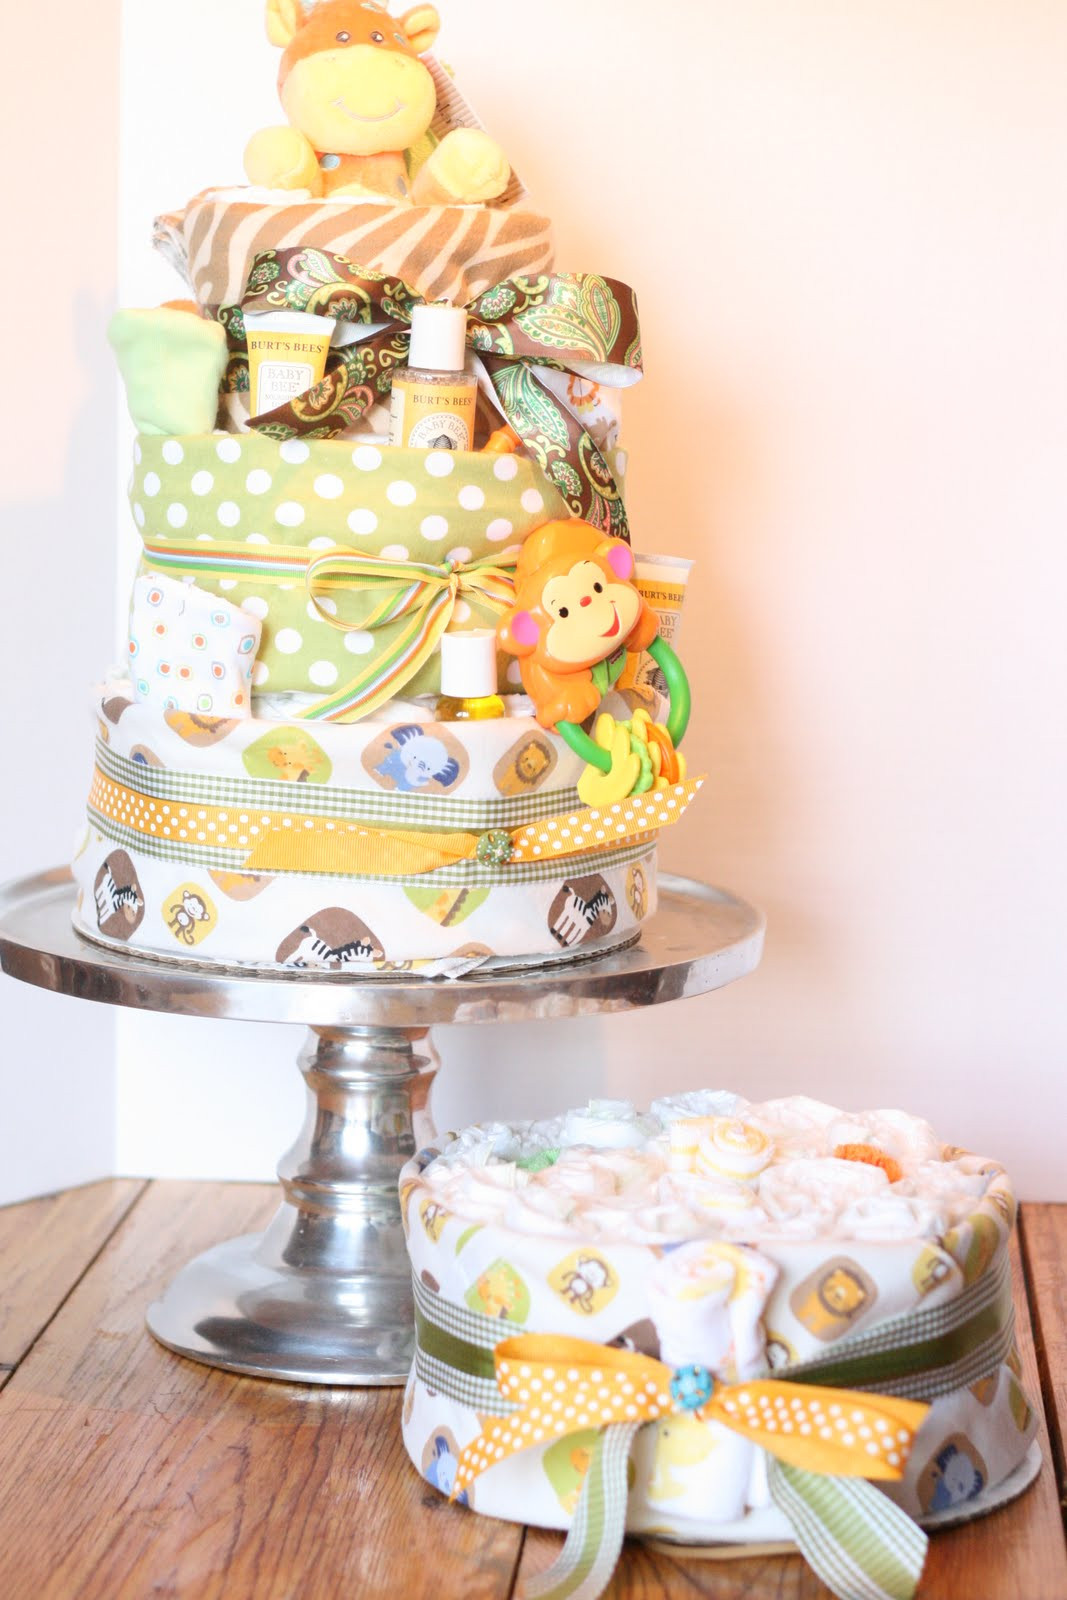 Small Baby Shower Gift Ideas
 25 DIY Baby Shower Gifts for the Little Boy on the Wa